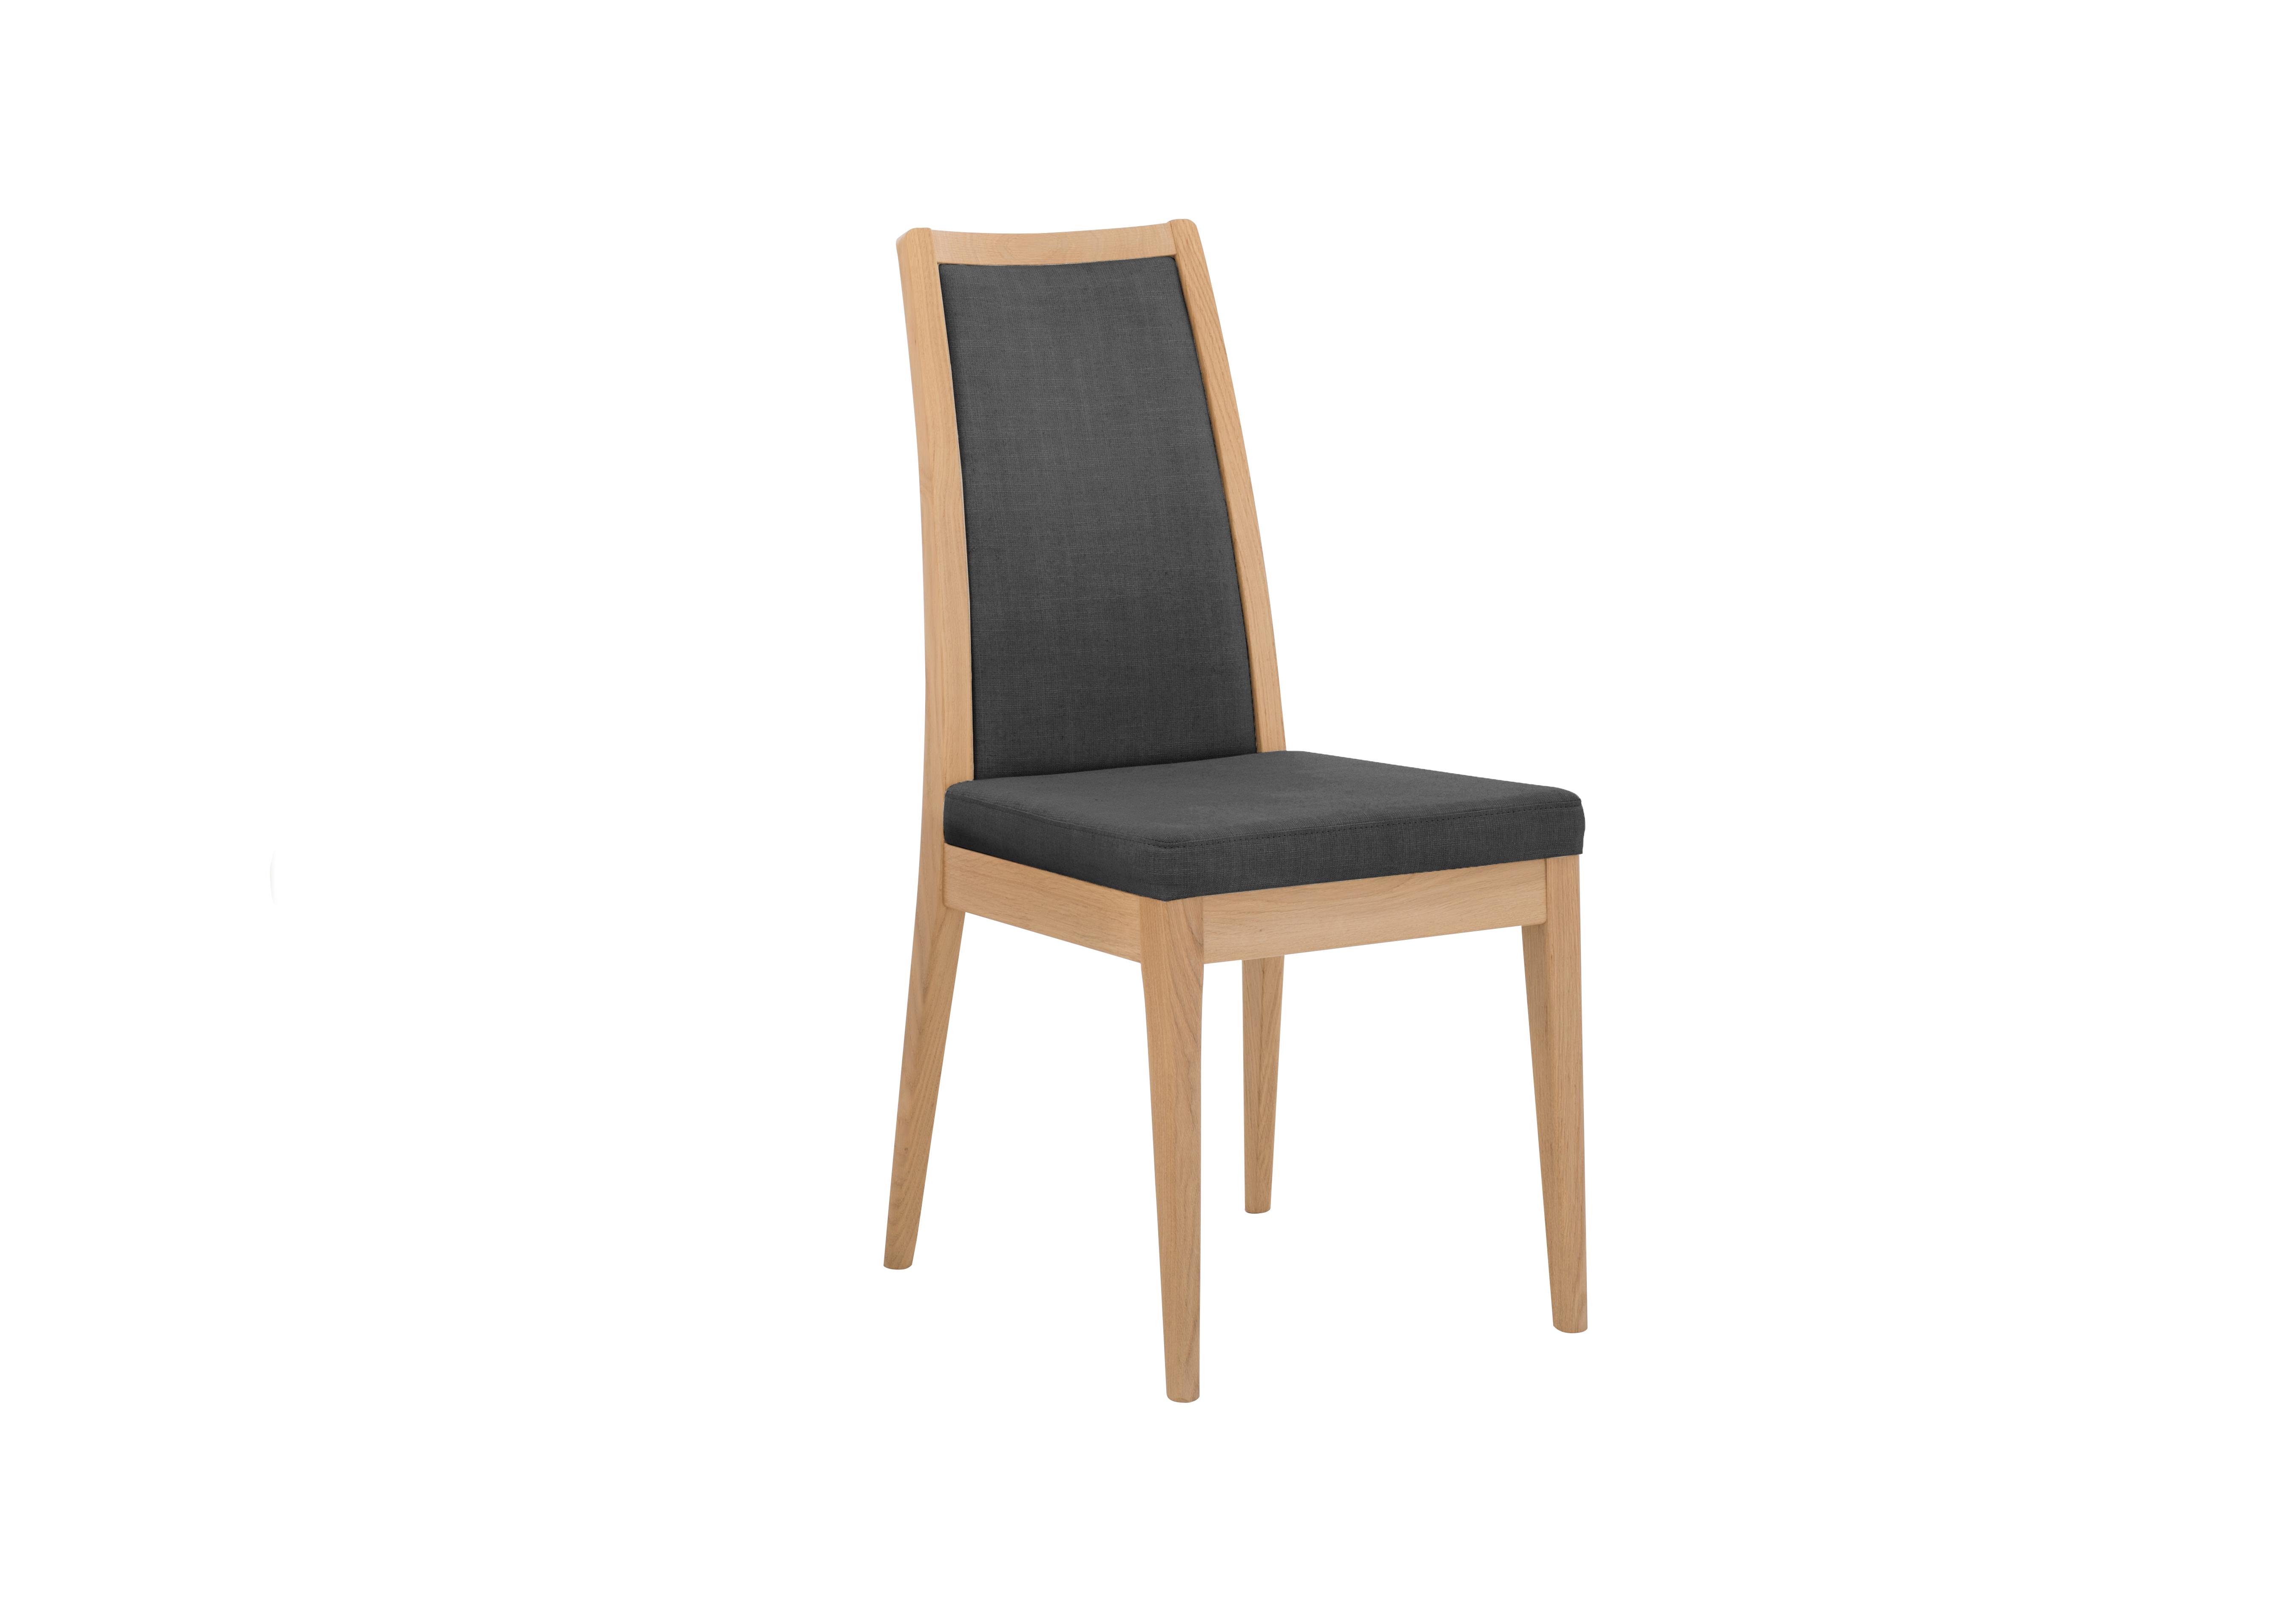 Romana Padded Back Dining Chair in C685 on Furniture Village